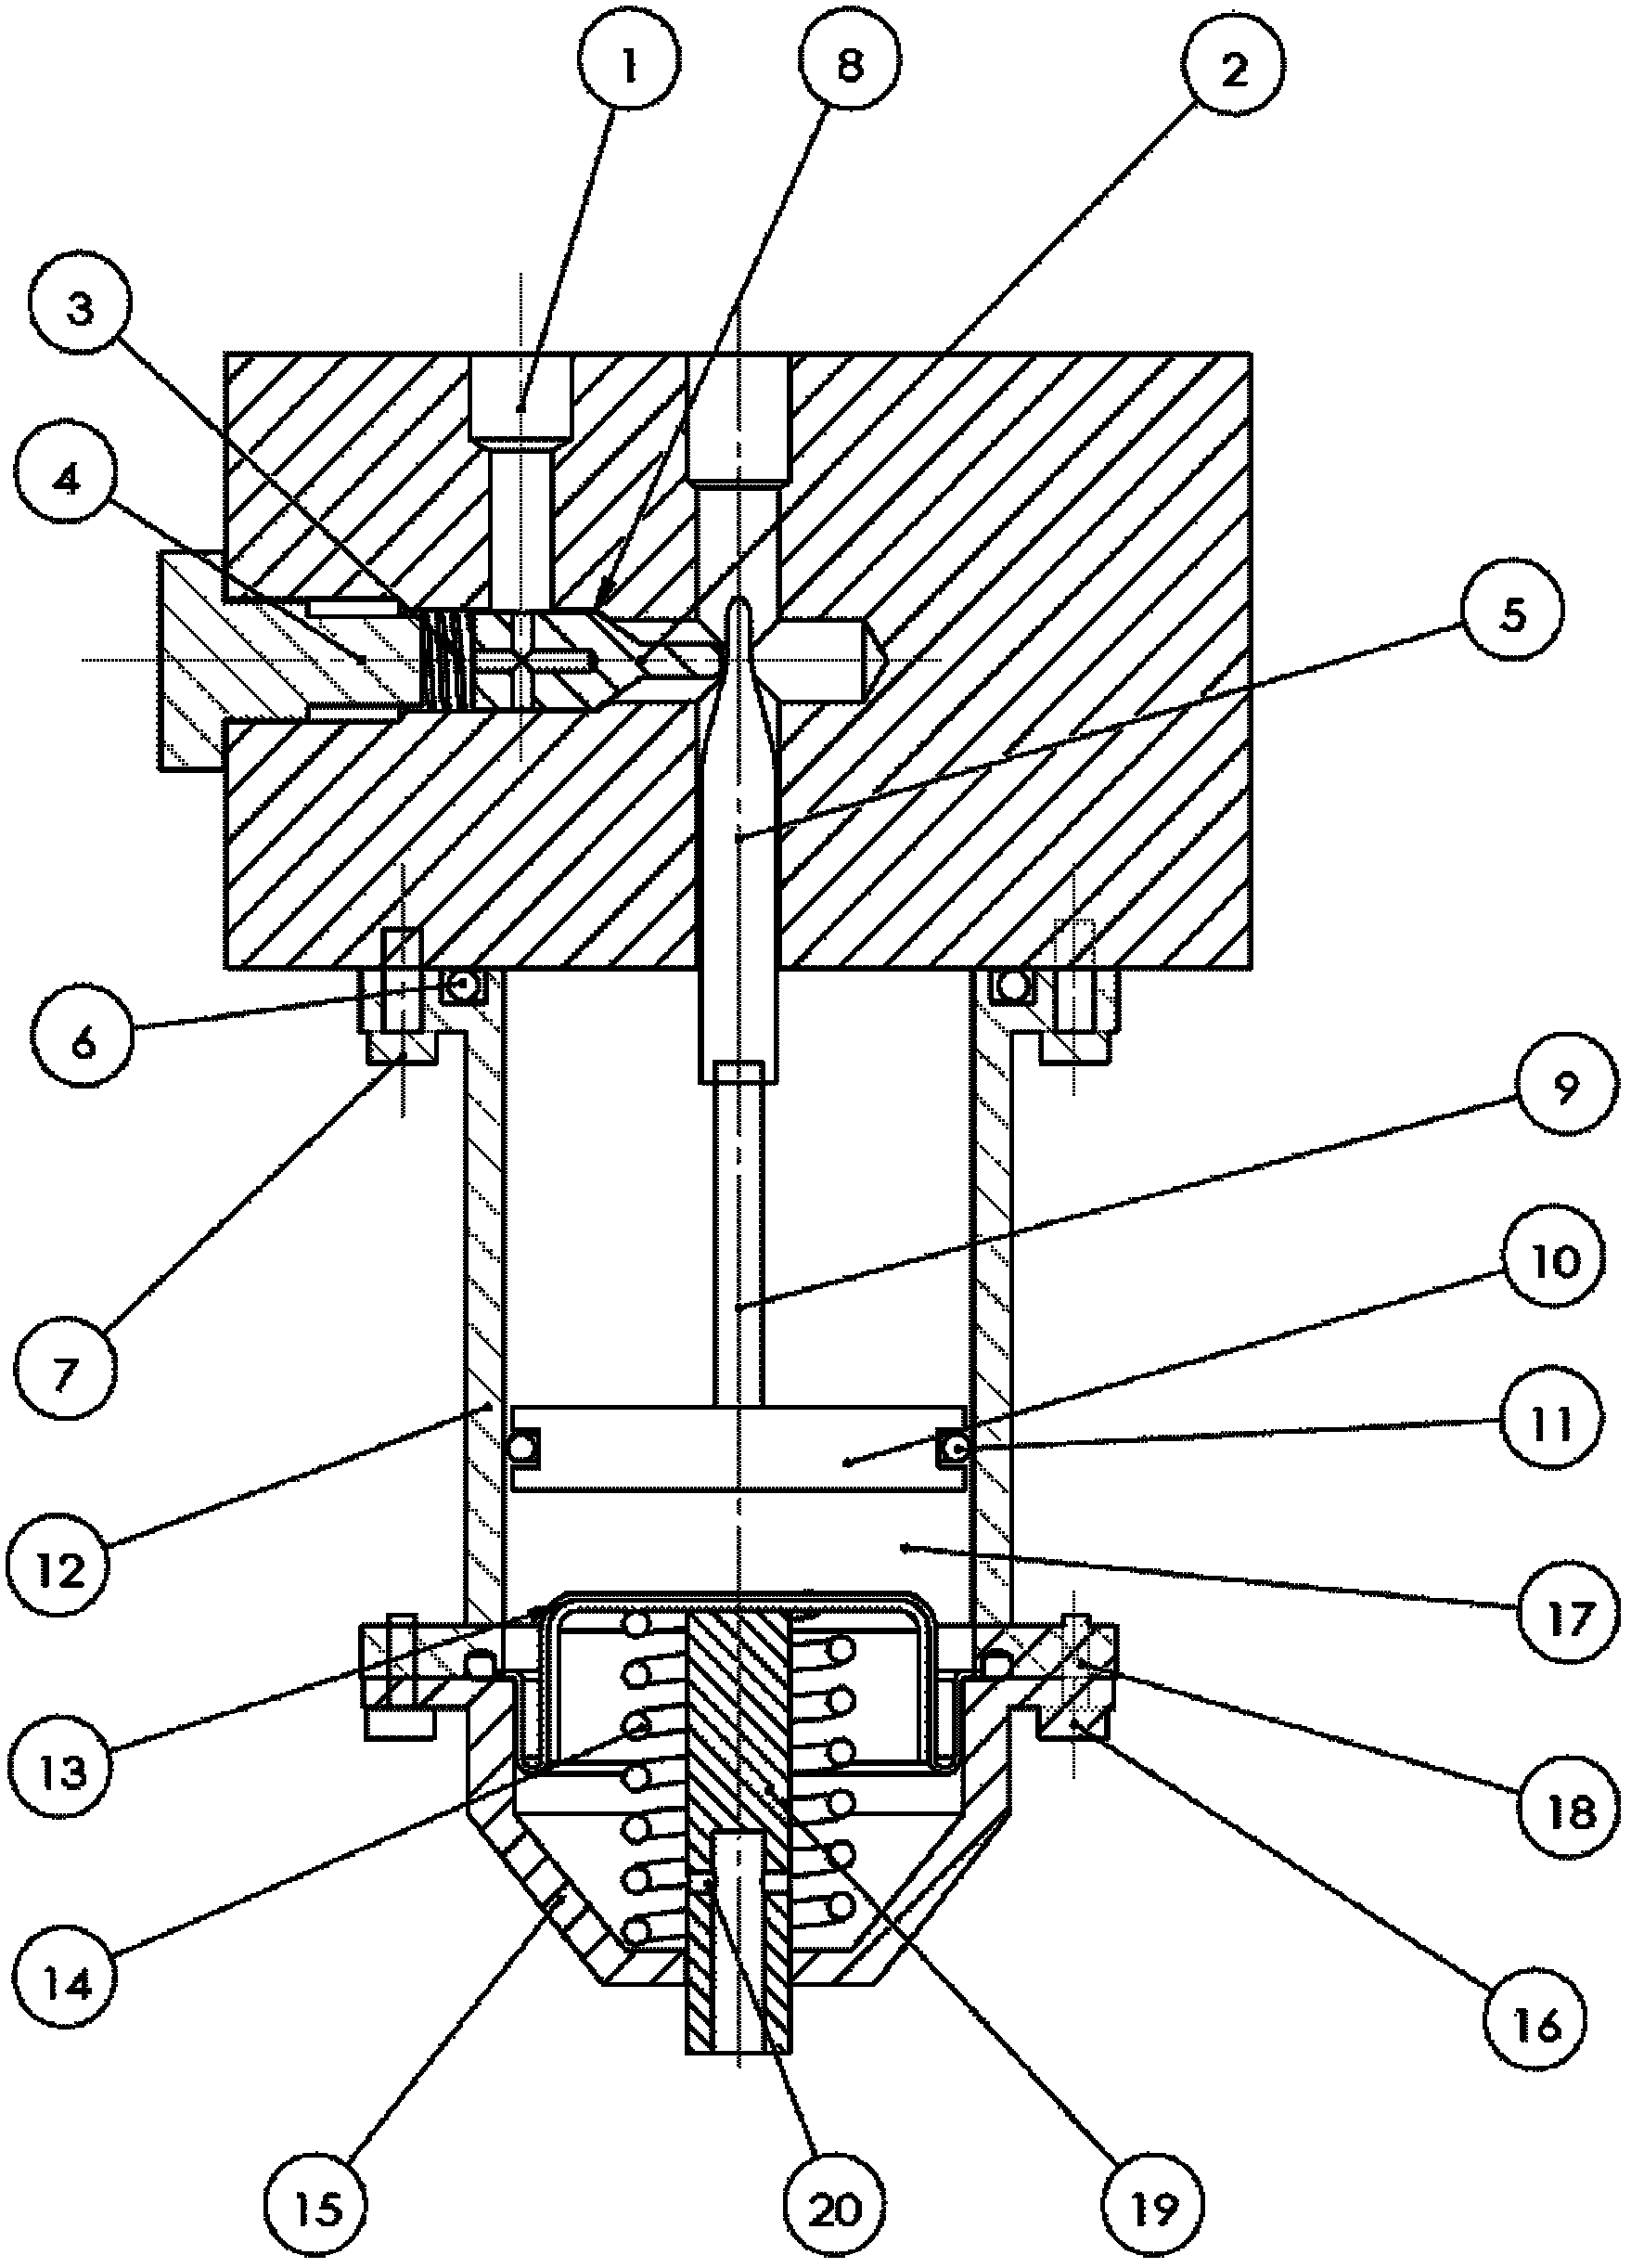 Pressure balance retainer for underwater oil charge system